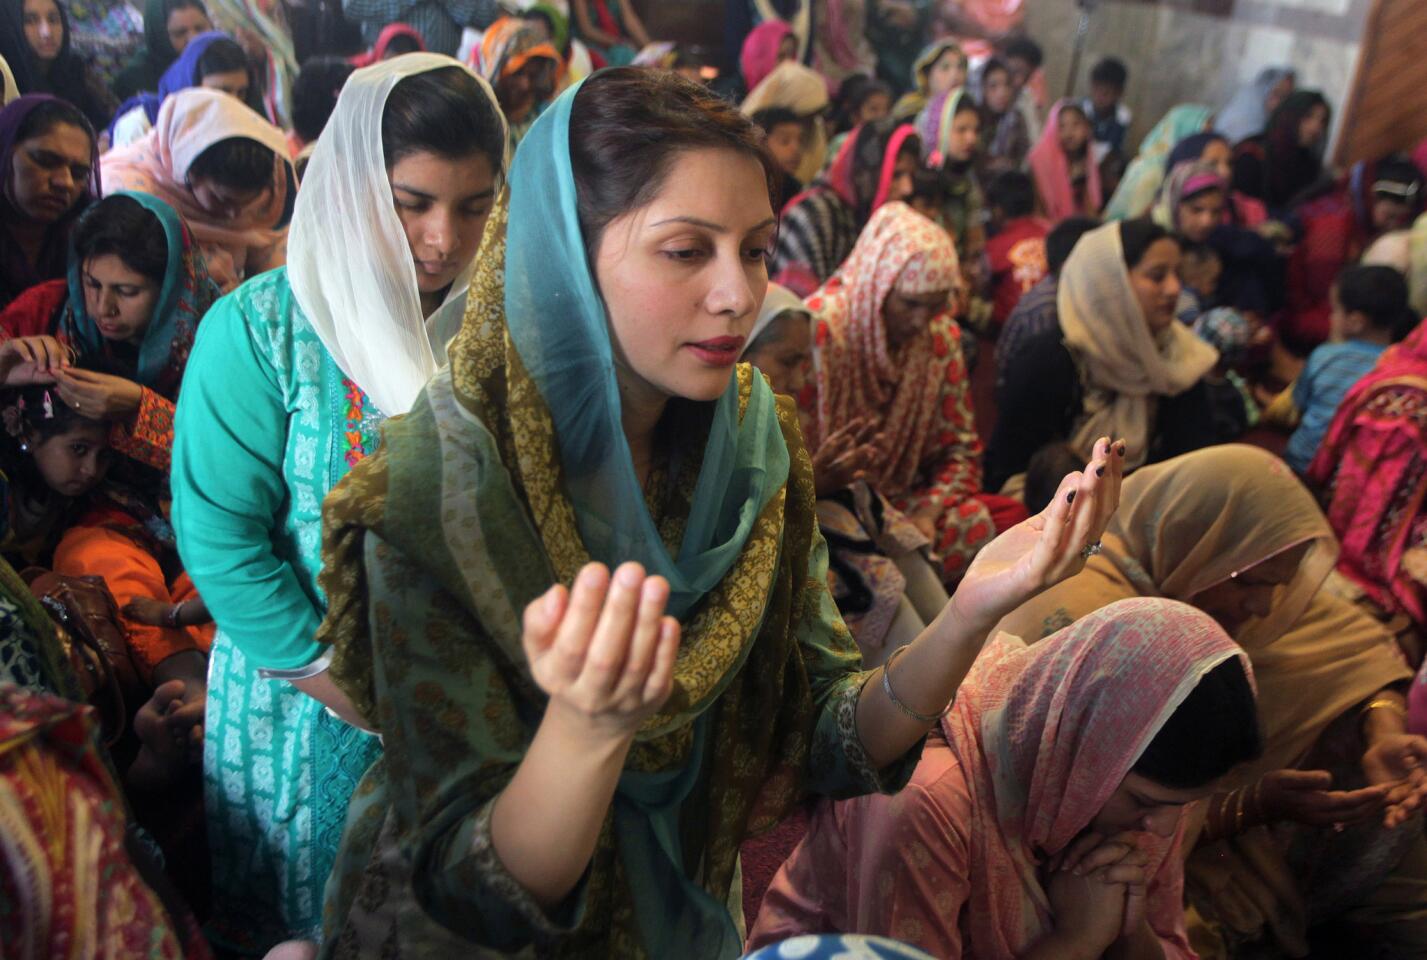 Christian women pray during an Easter service at St. Anthony's Church in Lahore, Pakistan.